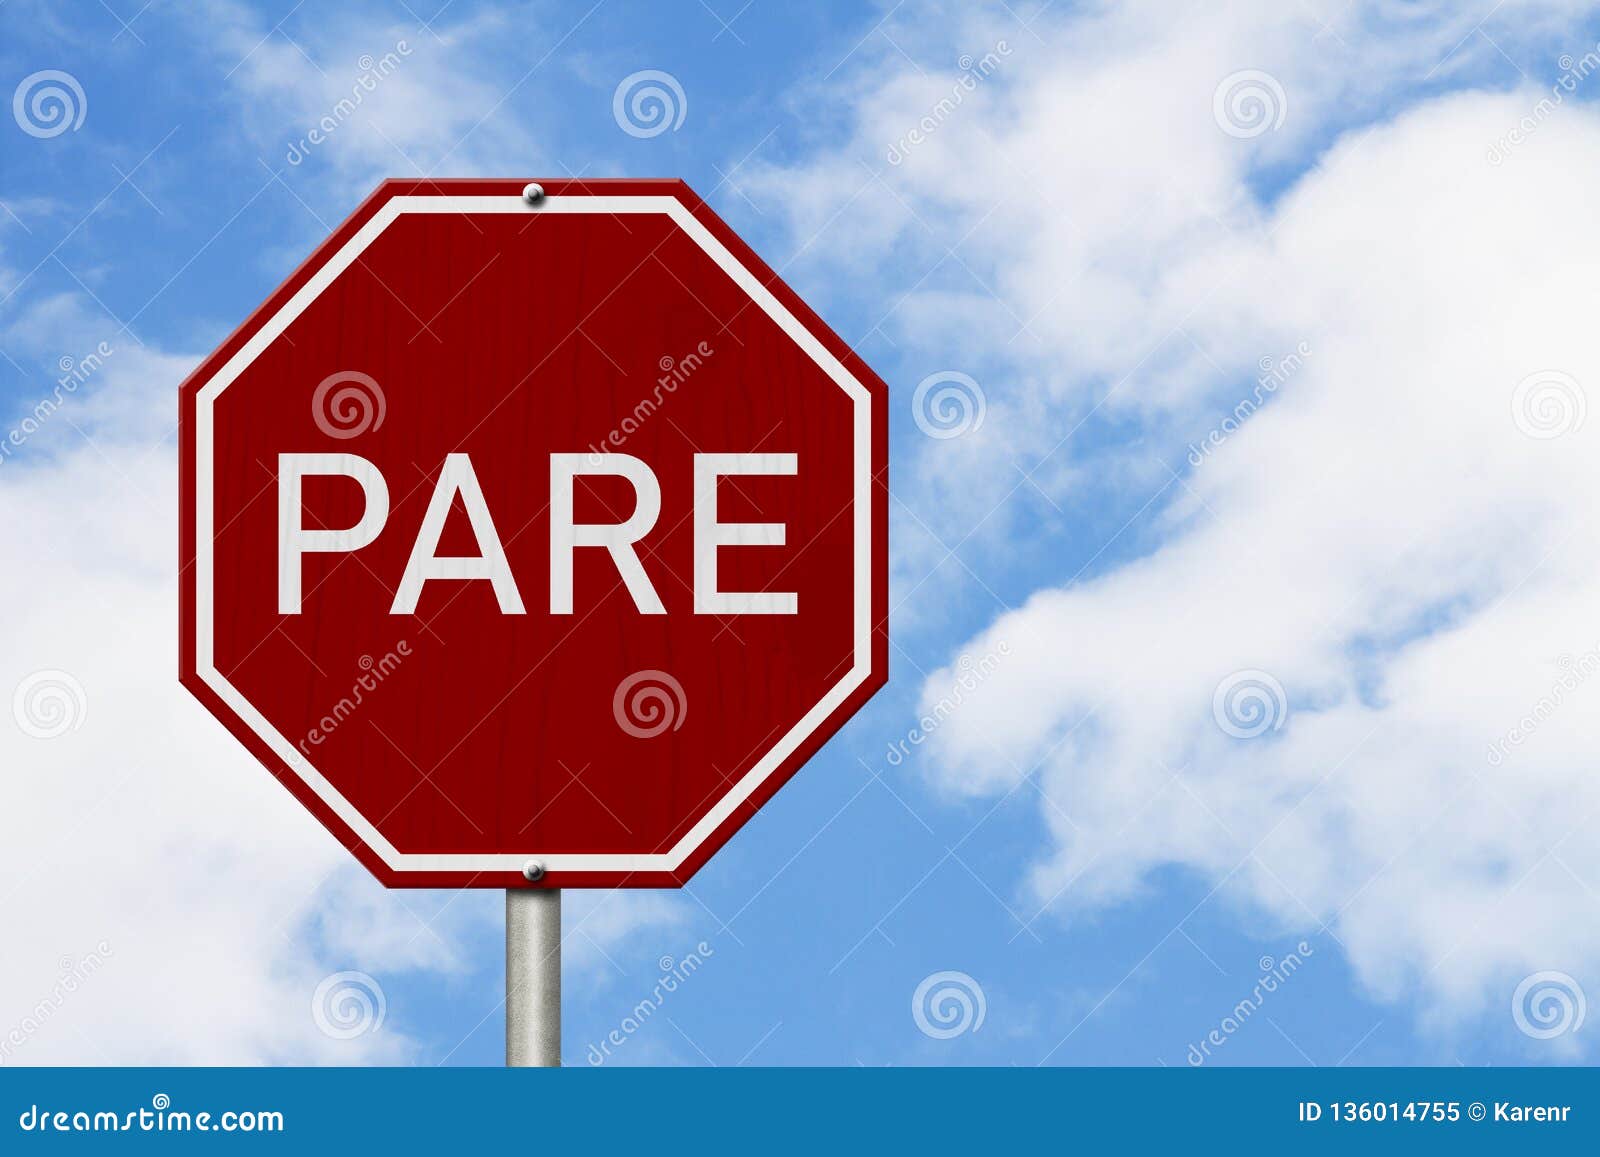 red and white pare stop sign